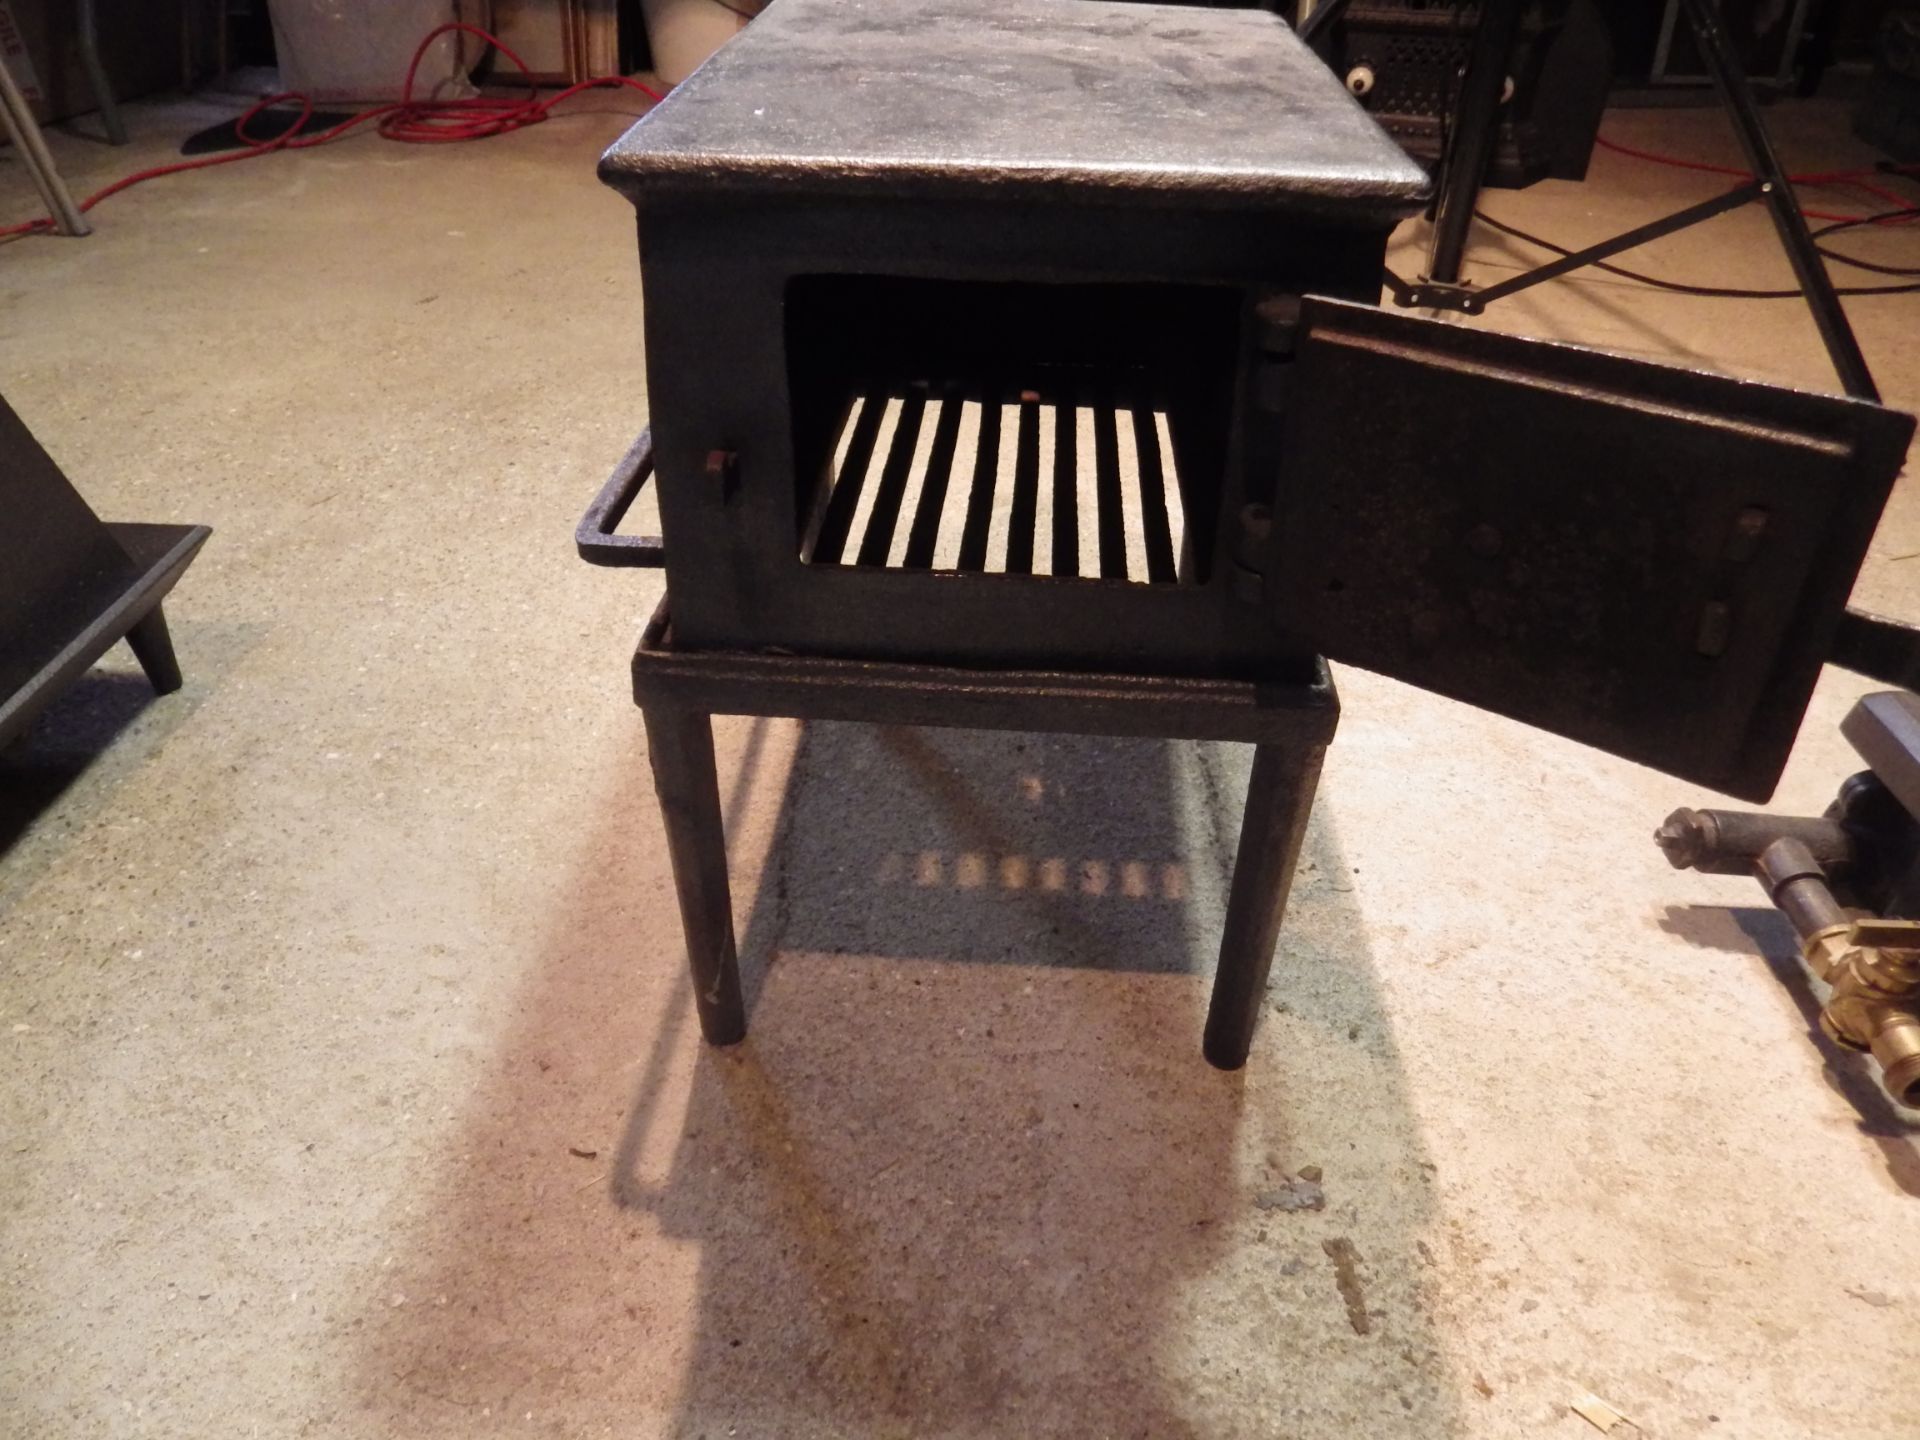 Large cast iron stove with grate and latch door on stand, stove is 34cm x 25cmx 19cm tall - Image 2 of 4